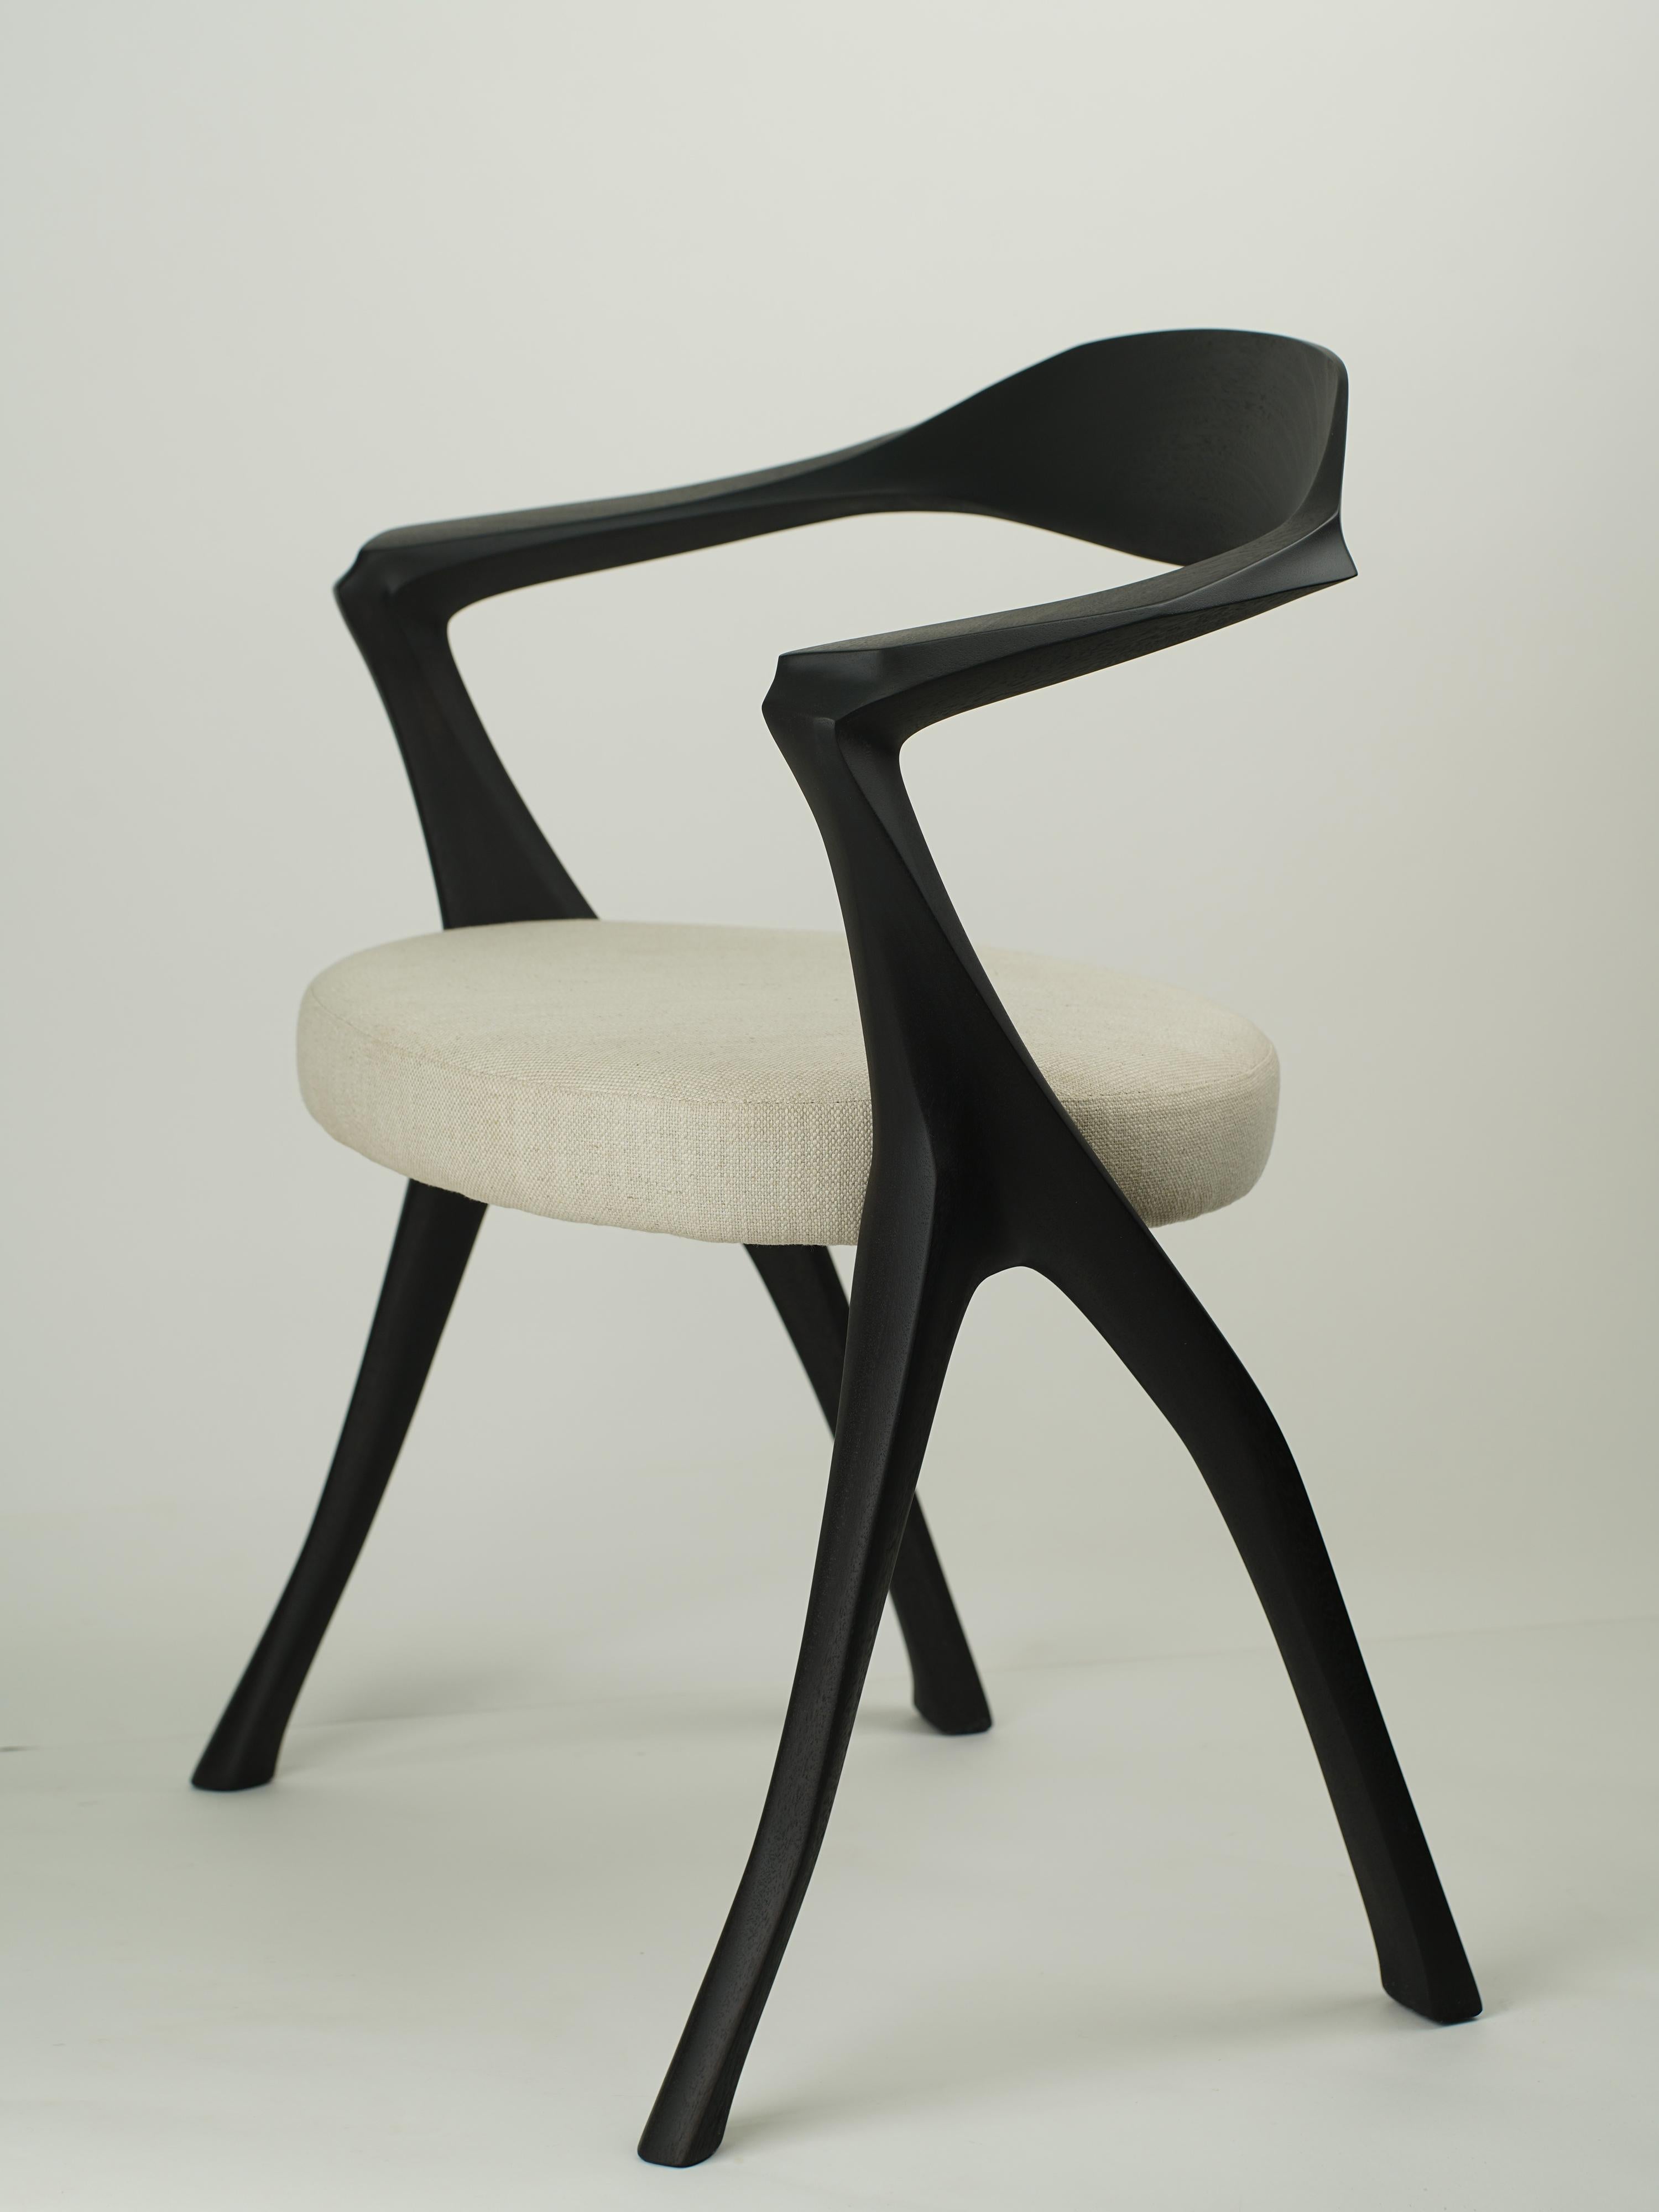 HOMAGE Chair-Organic, Sculptural, HandCarved, Ebonized ContemporaryDining Armchair For Sale 4